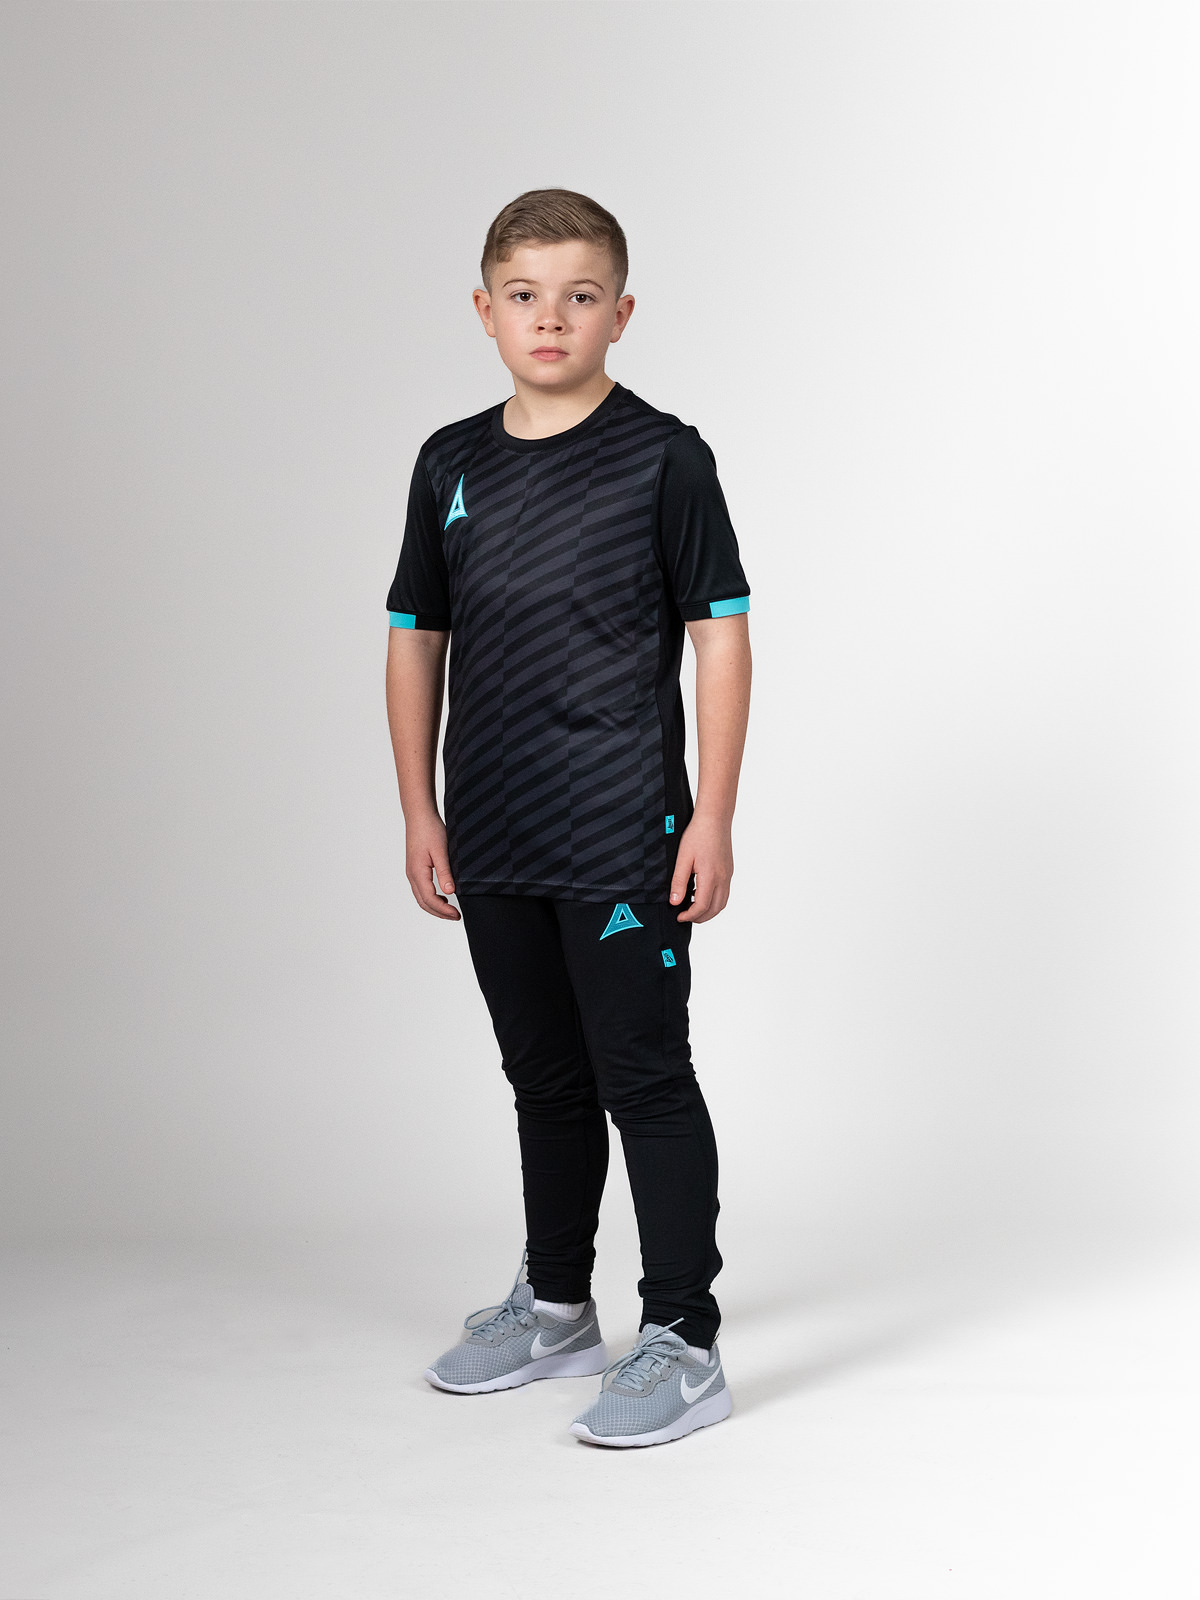 picture of enigma jersey - black